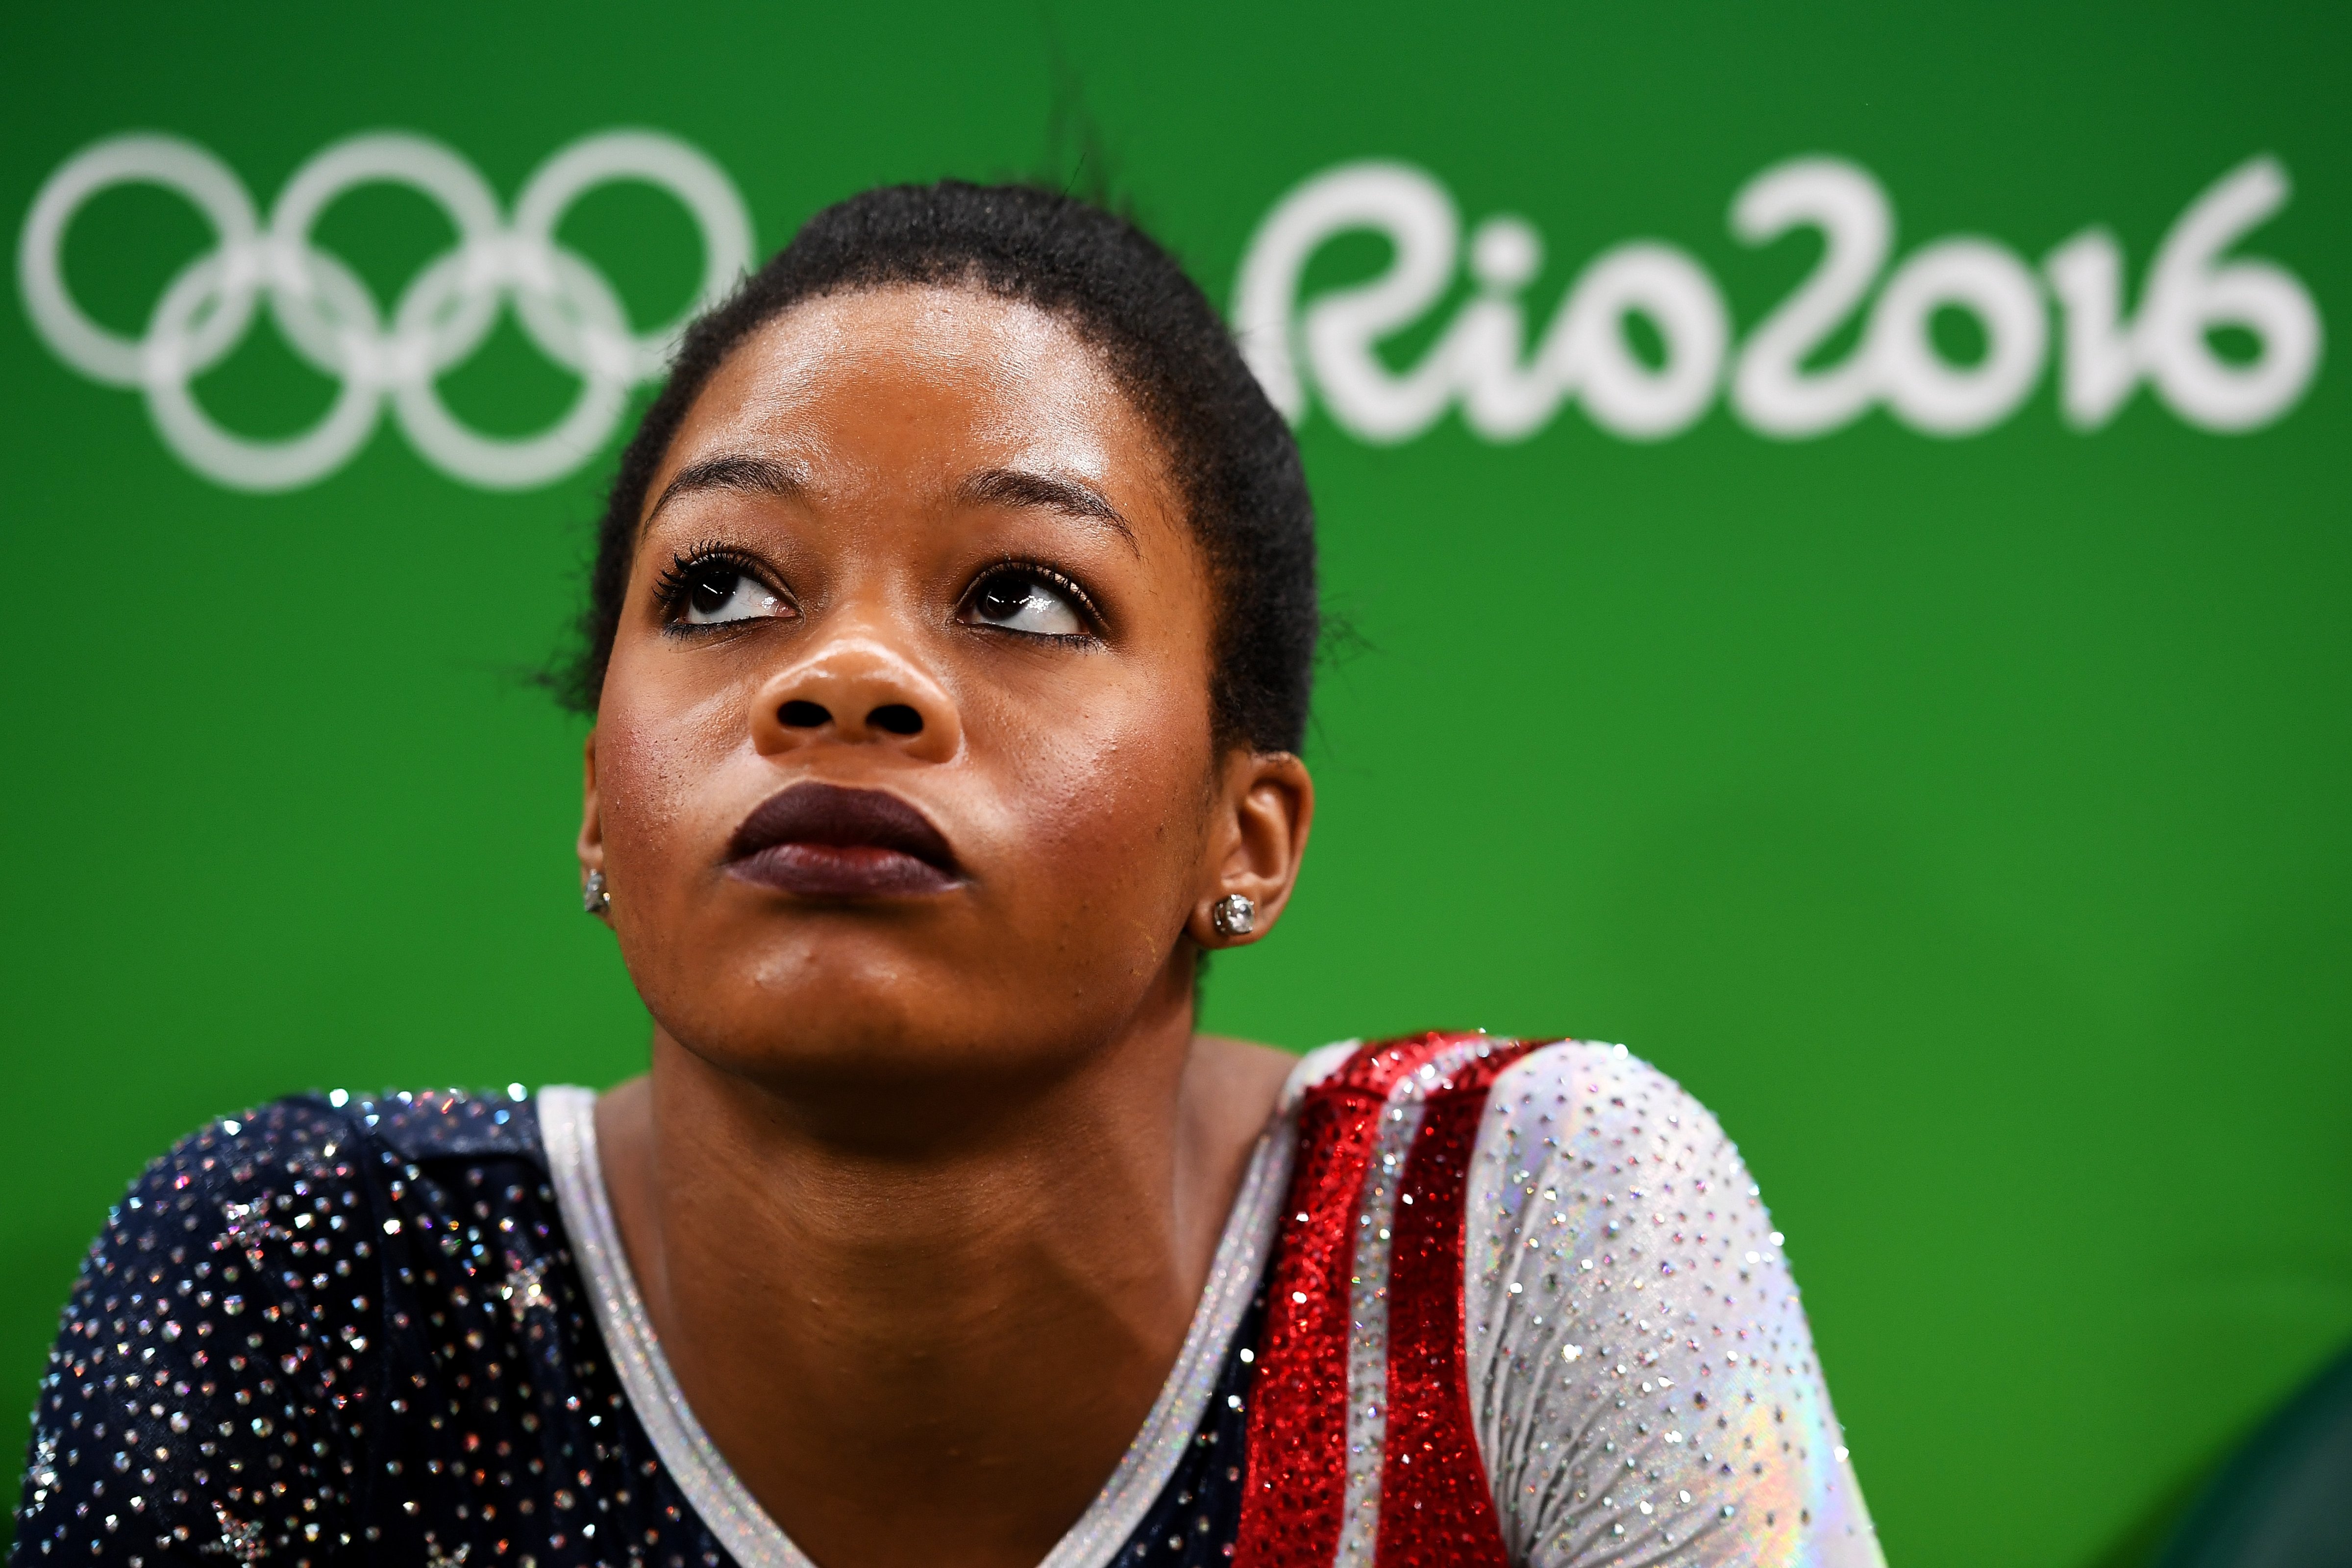 RIO DE JANEIRO, BRAZIL - AUGUST 09: Gabrielle Douglas of the United States looks on during the Artistic Gymnastics Women's Team Final on Day 4 of the Rio 2016 Olympic Games at the Rio Olympic Arena on August 9, 2016 in Rio de Janeiro, Brazil.  (Photo by Laurence Griffiths/Getty Images) (Laurence Griffiths/;Getty Images)